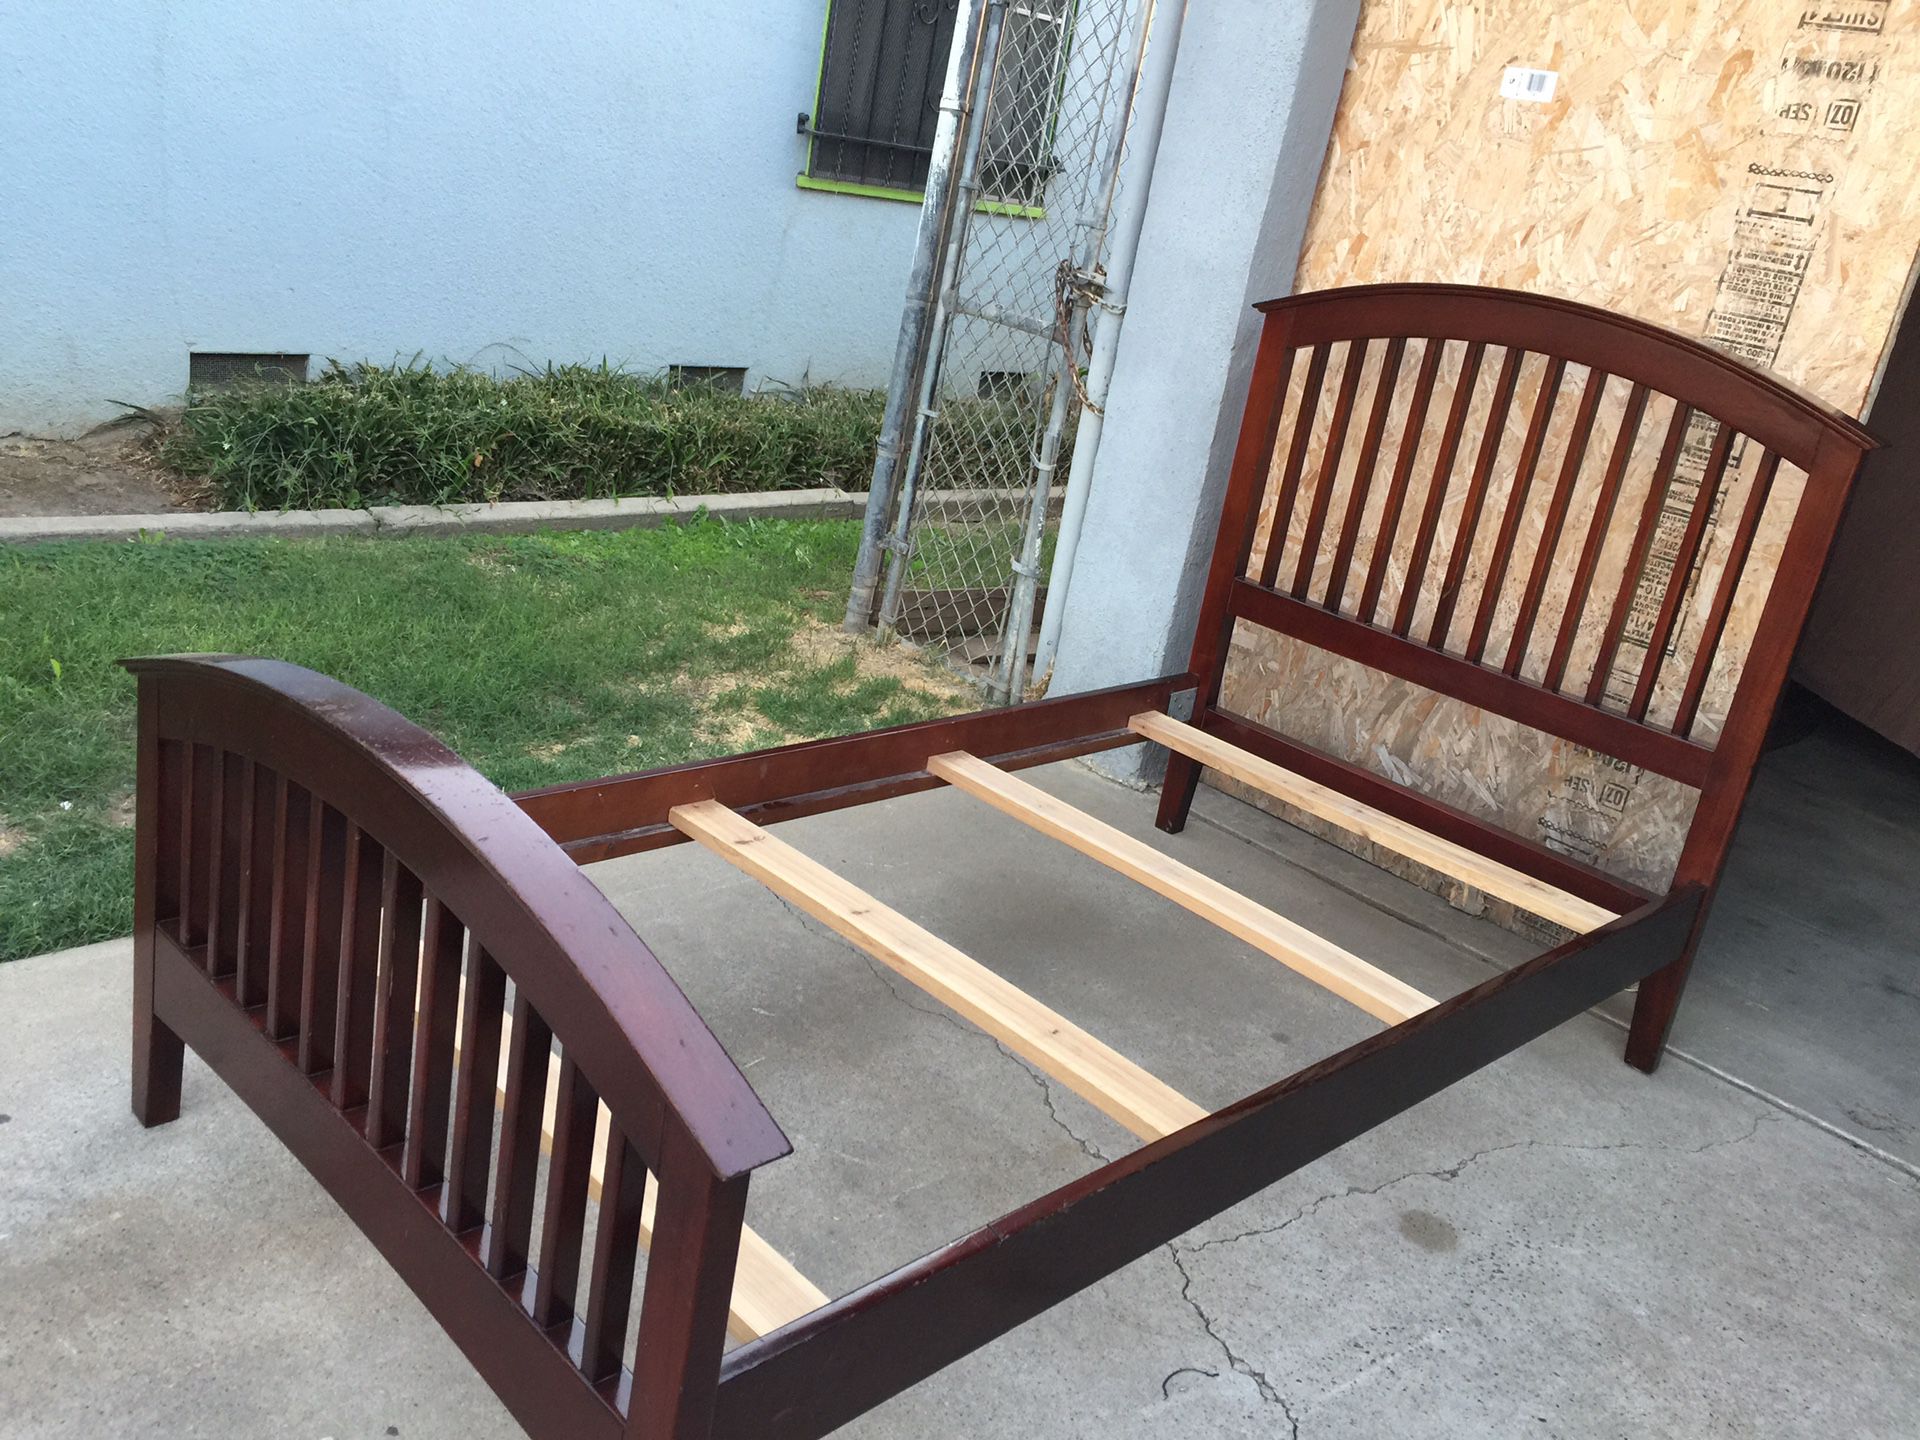 Twin bed frame come in very good condition.